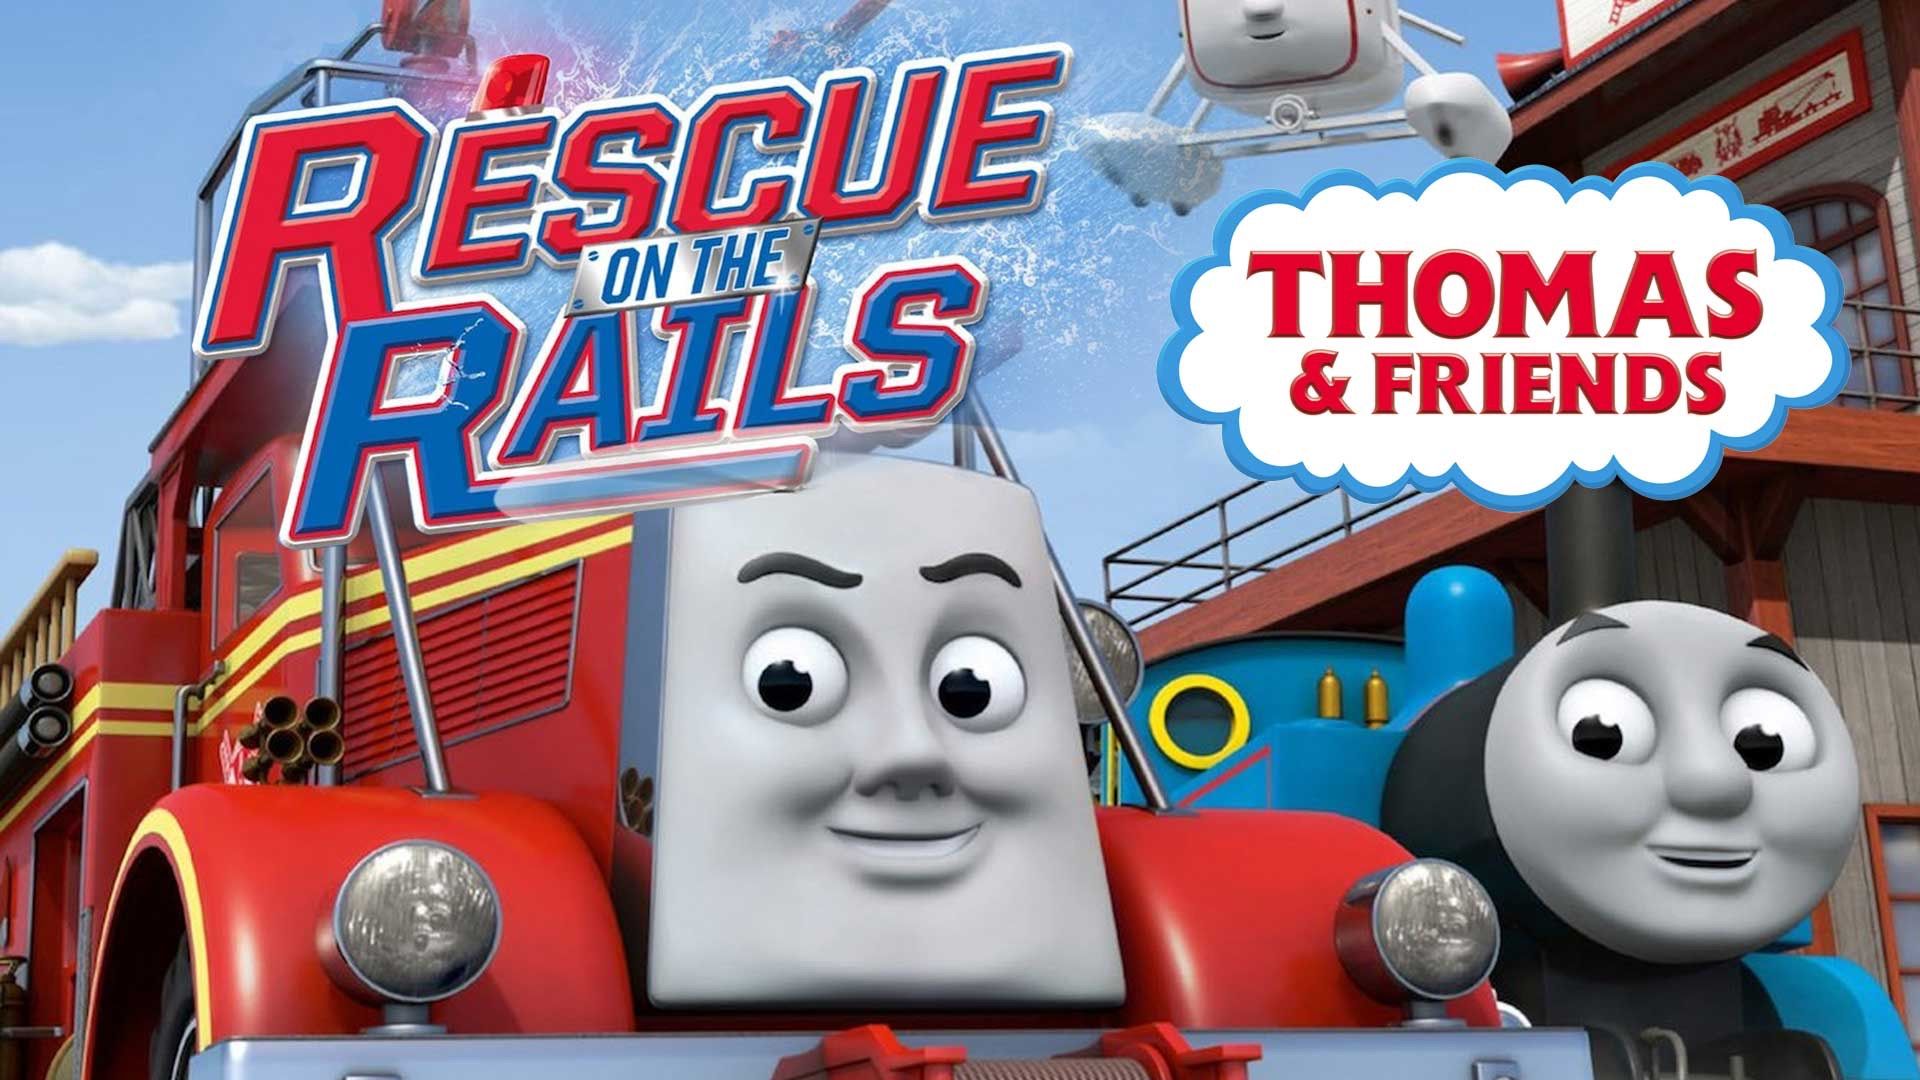 Thomas & Friends: Rescue on the Rails Backdrop